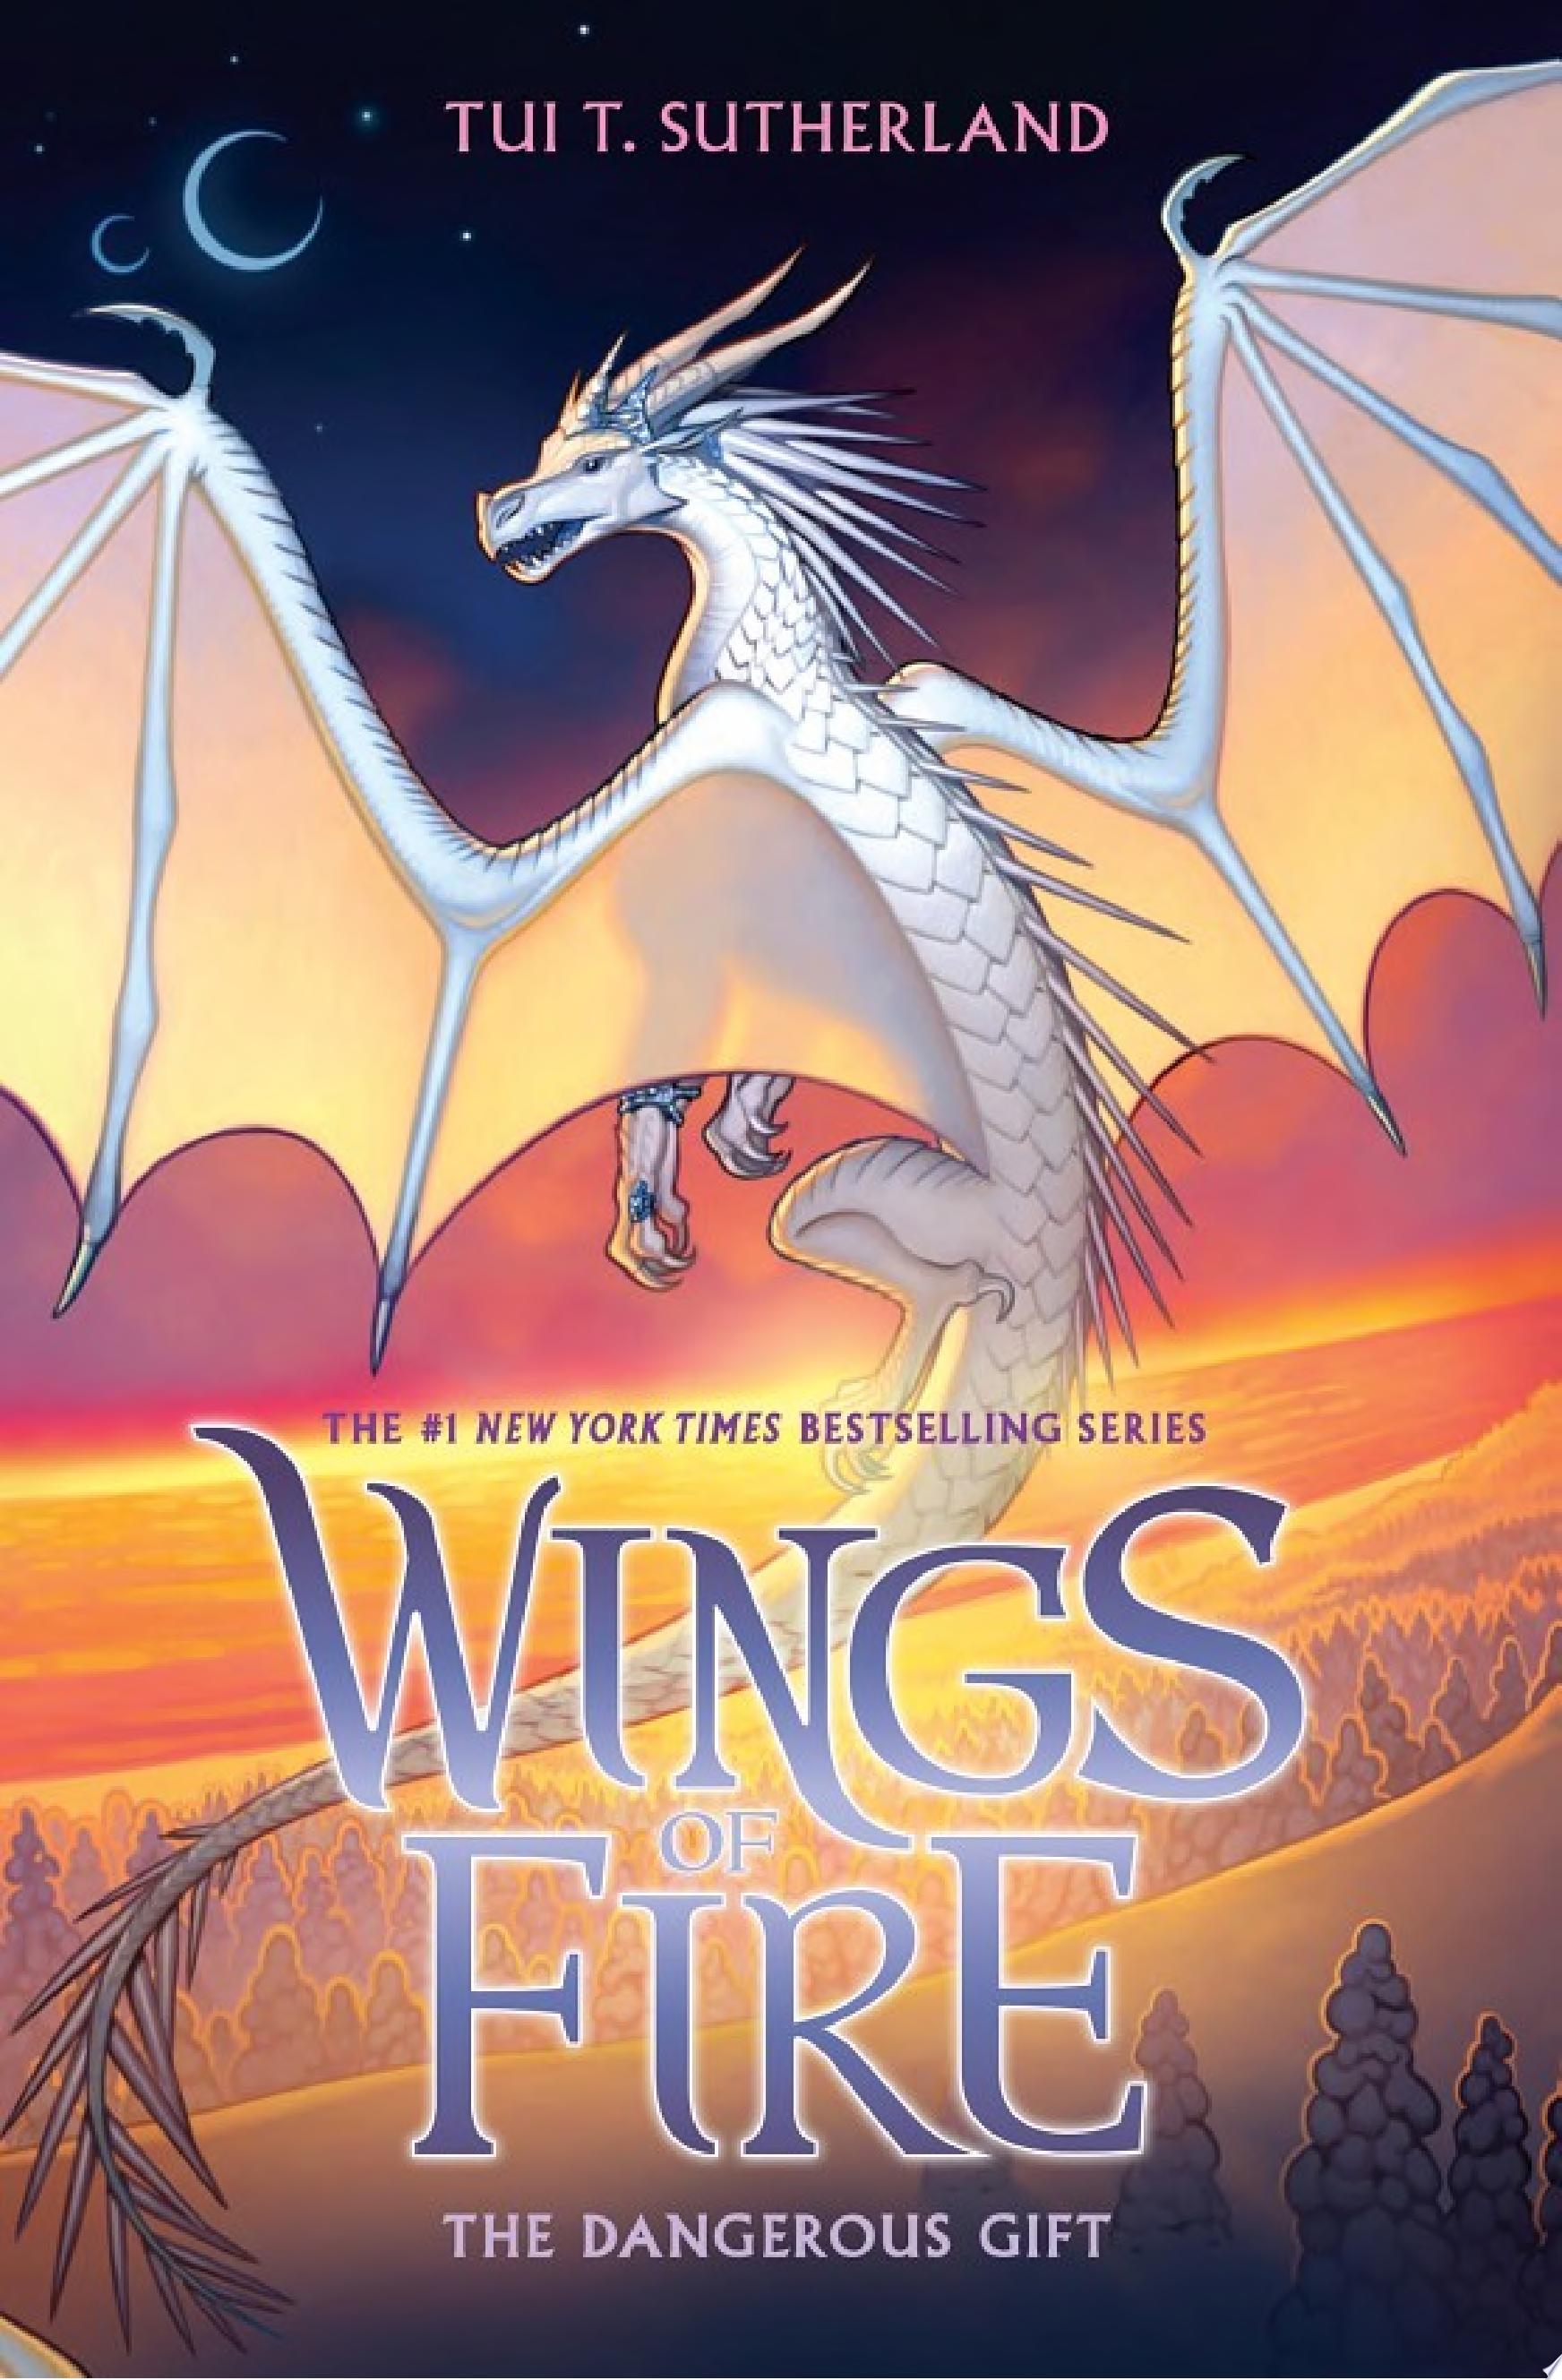 Image for "The Dangerous Gift (Wings of Fire, Book 14)"